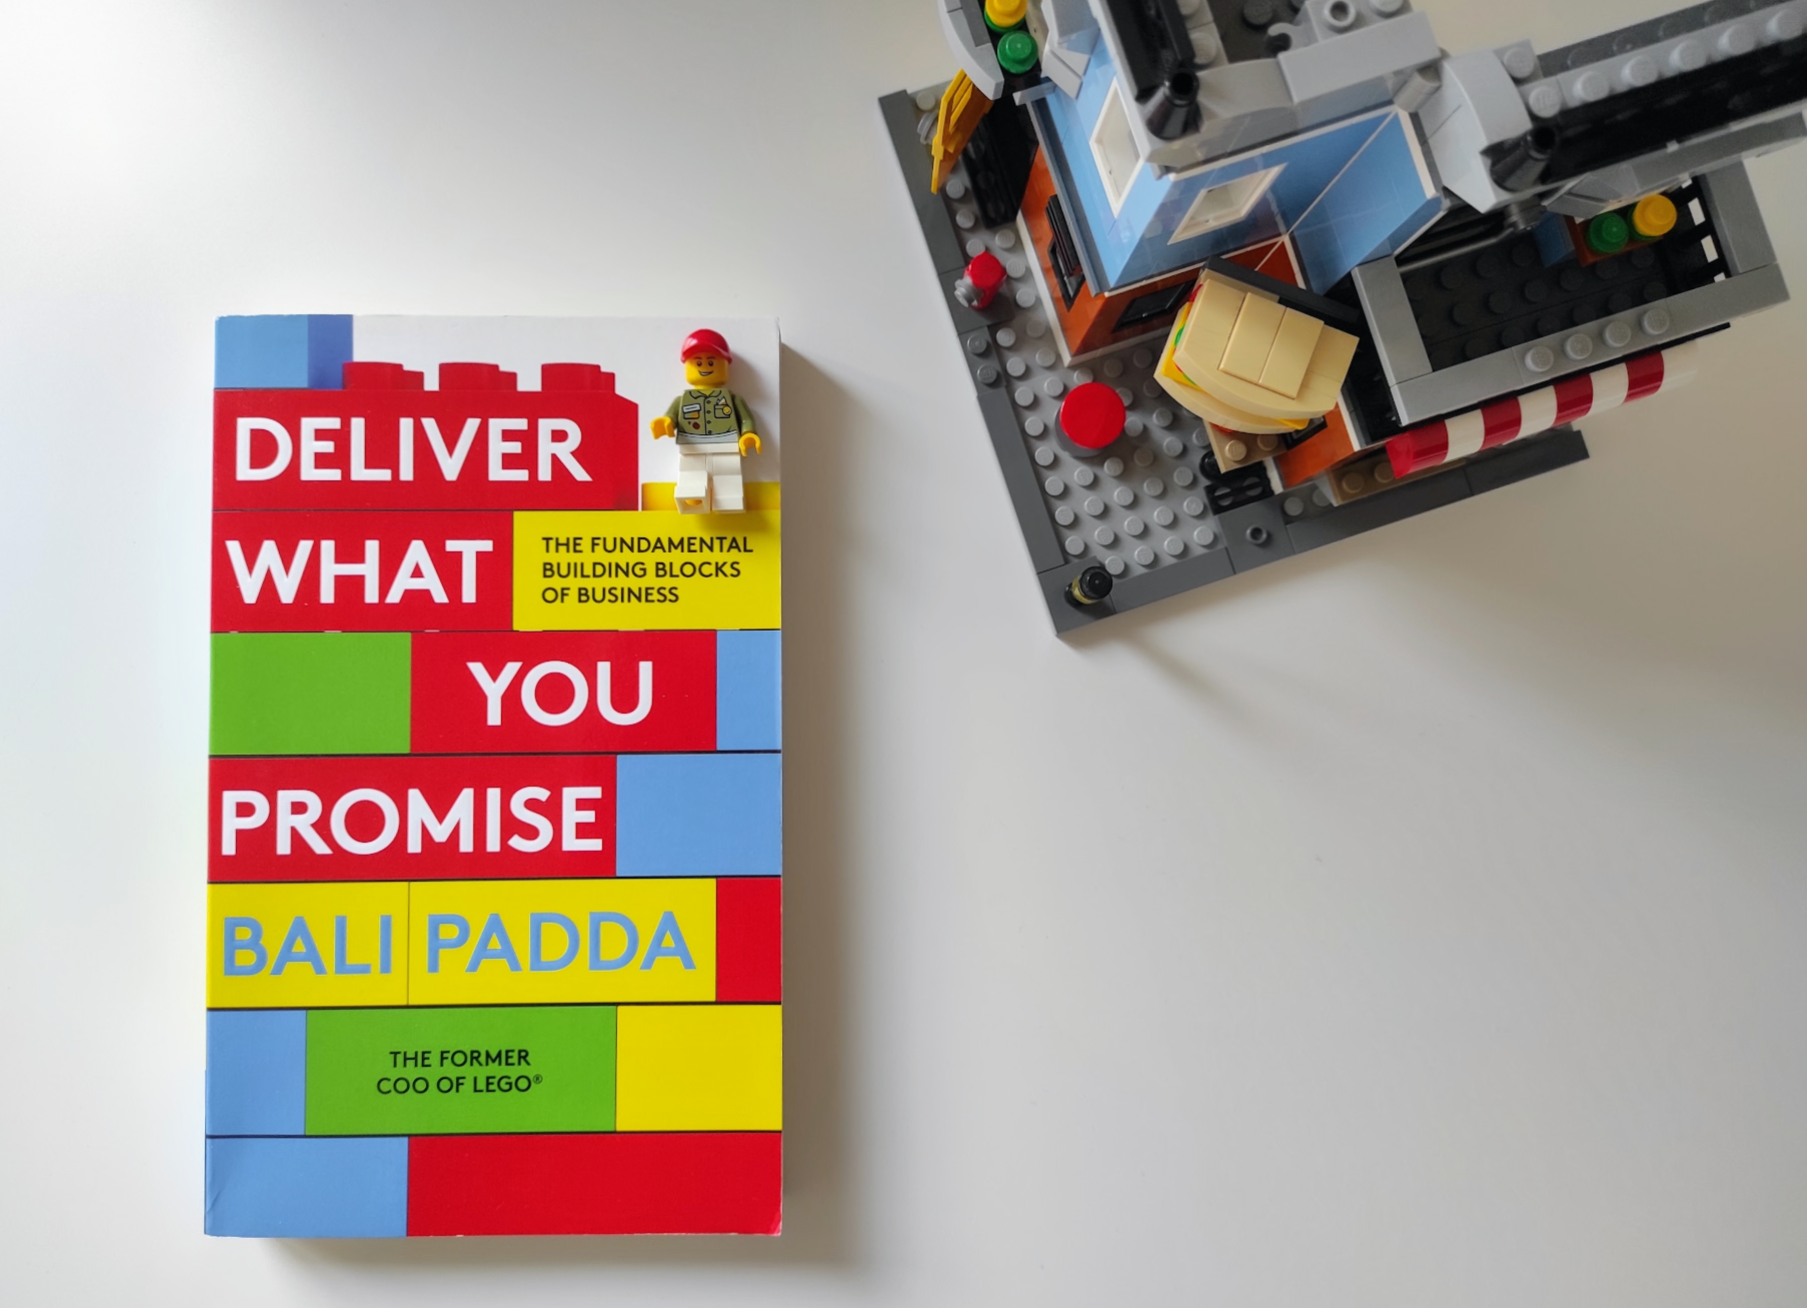 Deliver What You Promise - The Building Blocks of Business